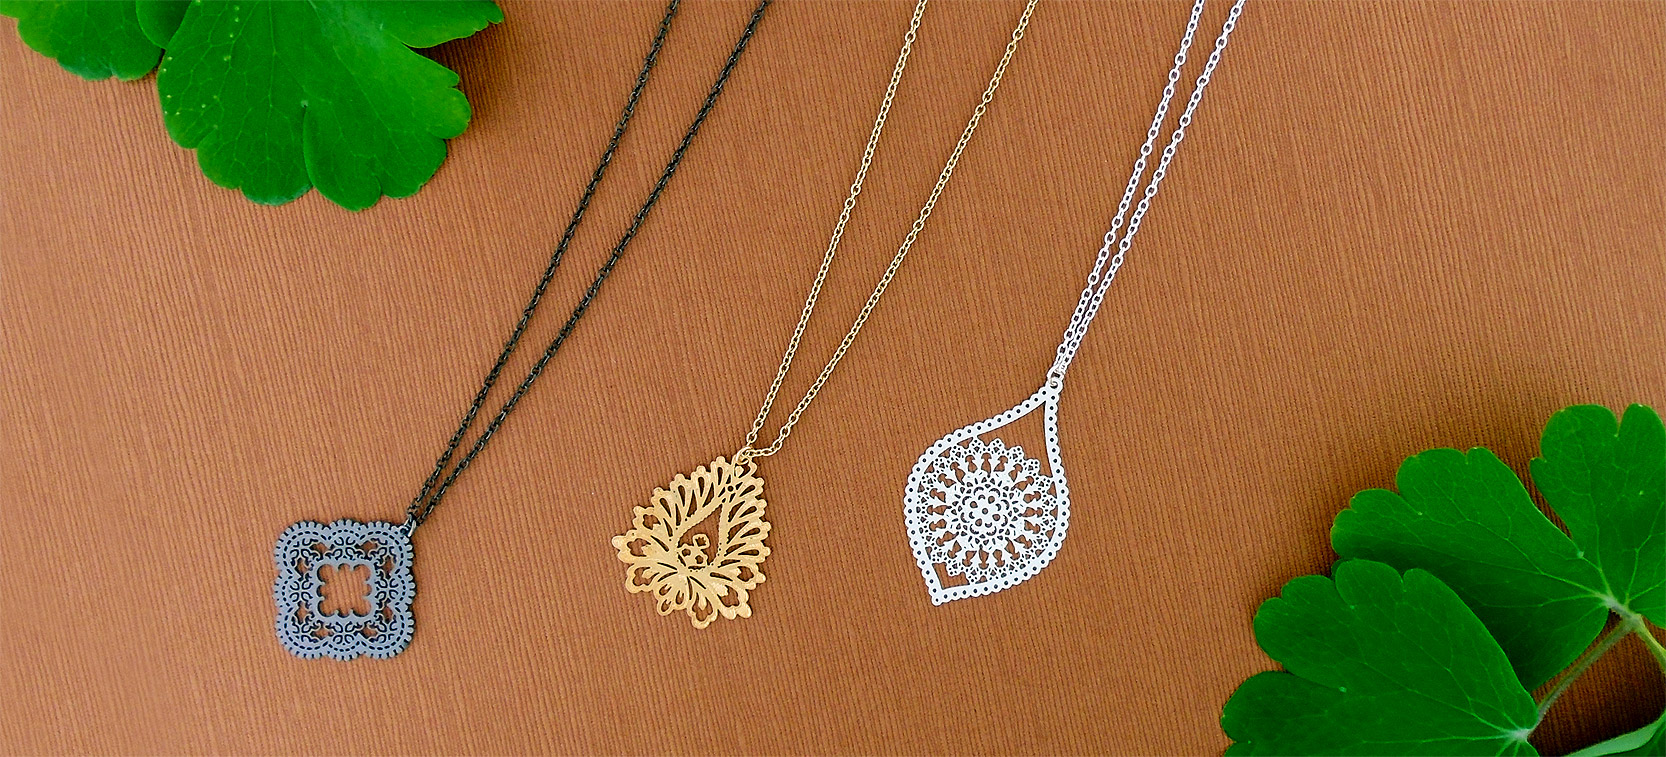 lavishy design & wholesale original, beautiful & affordable filigree necklaces to gift shops, boutiques & book stores in Canada, USA and worldwide.